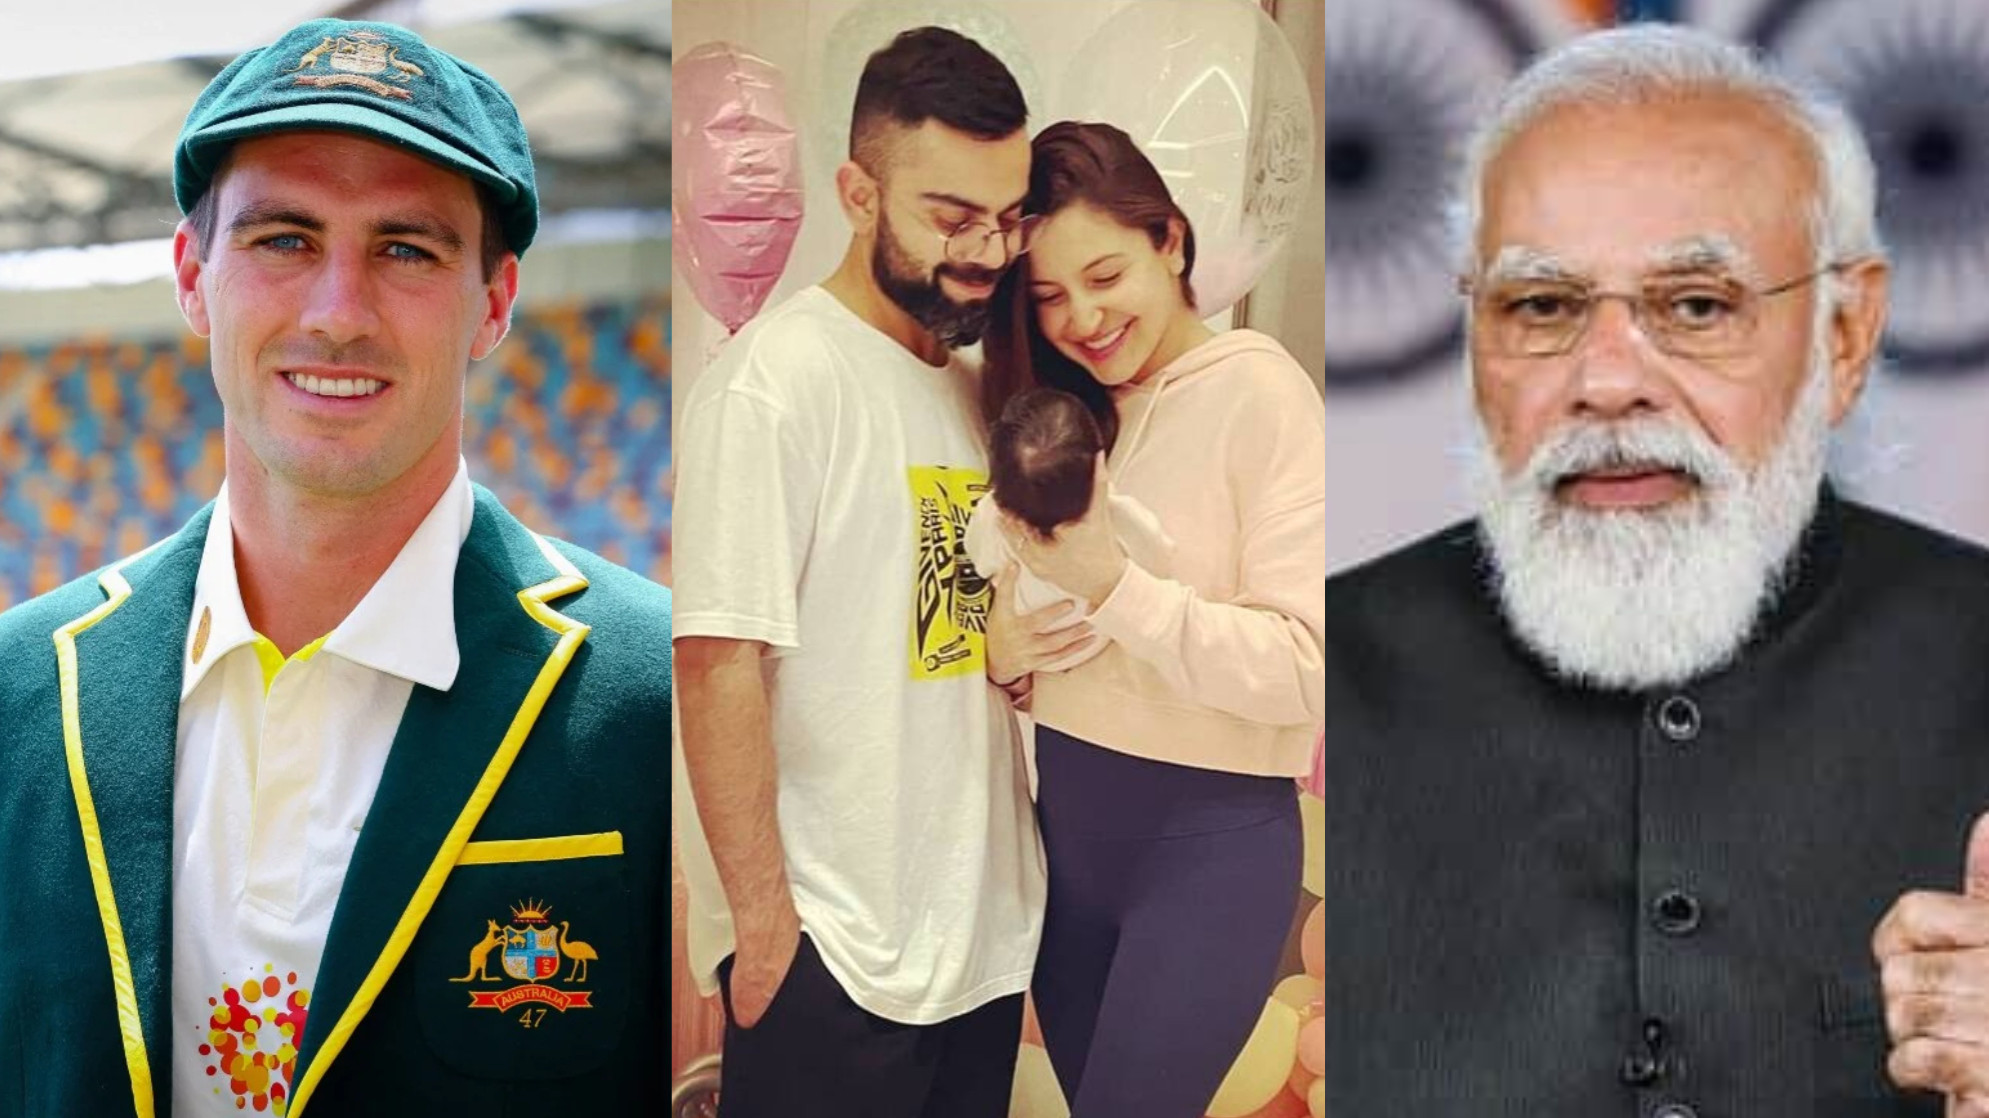 Kohli's announcement of daughter's birth most-liked tweet of 2021; Cummins, PM Modi feature as well